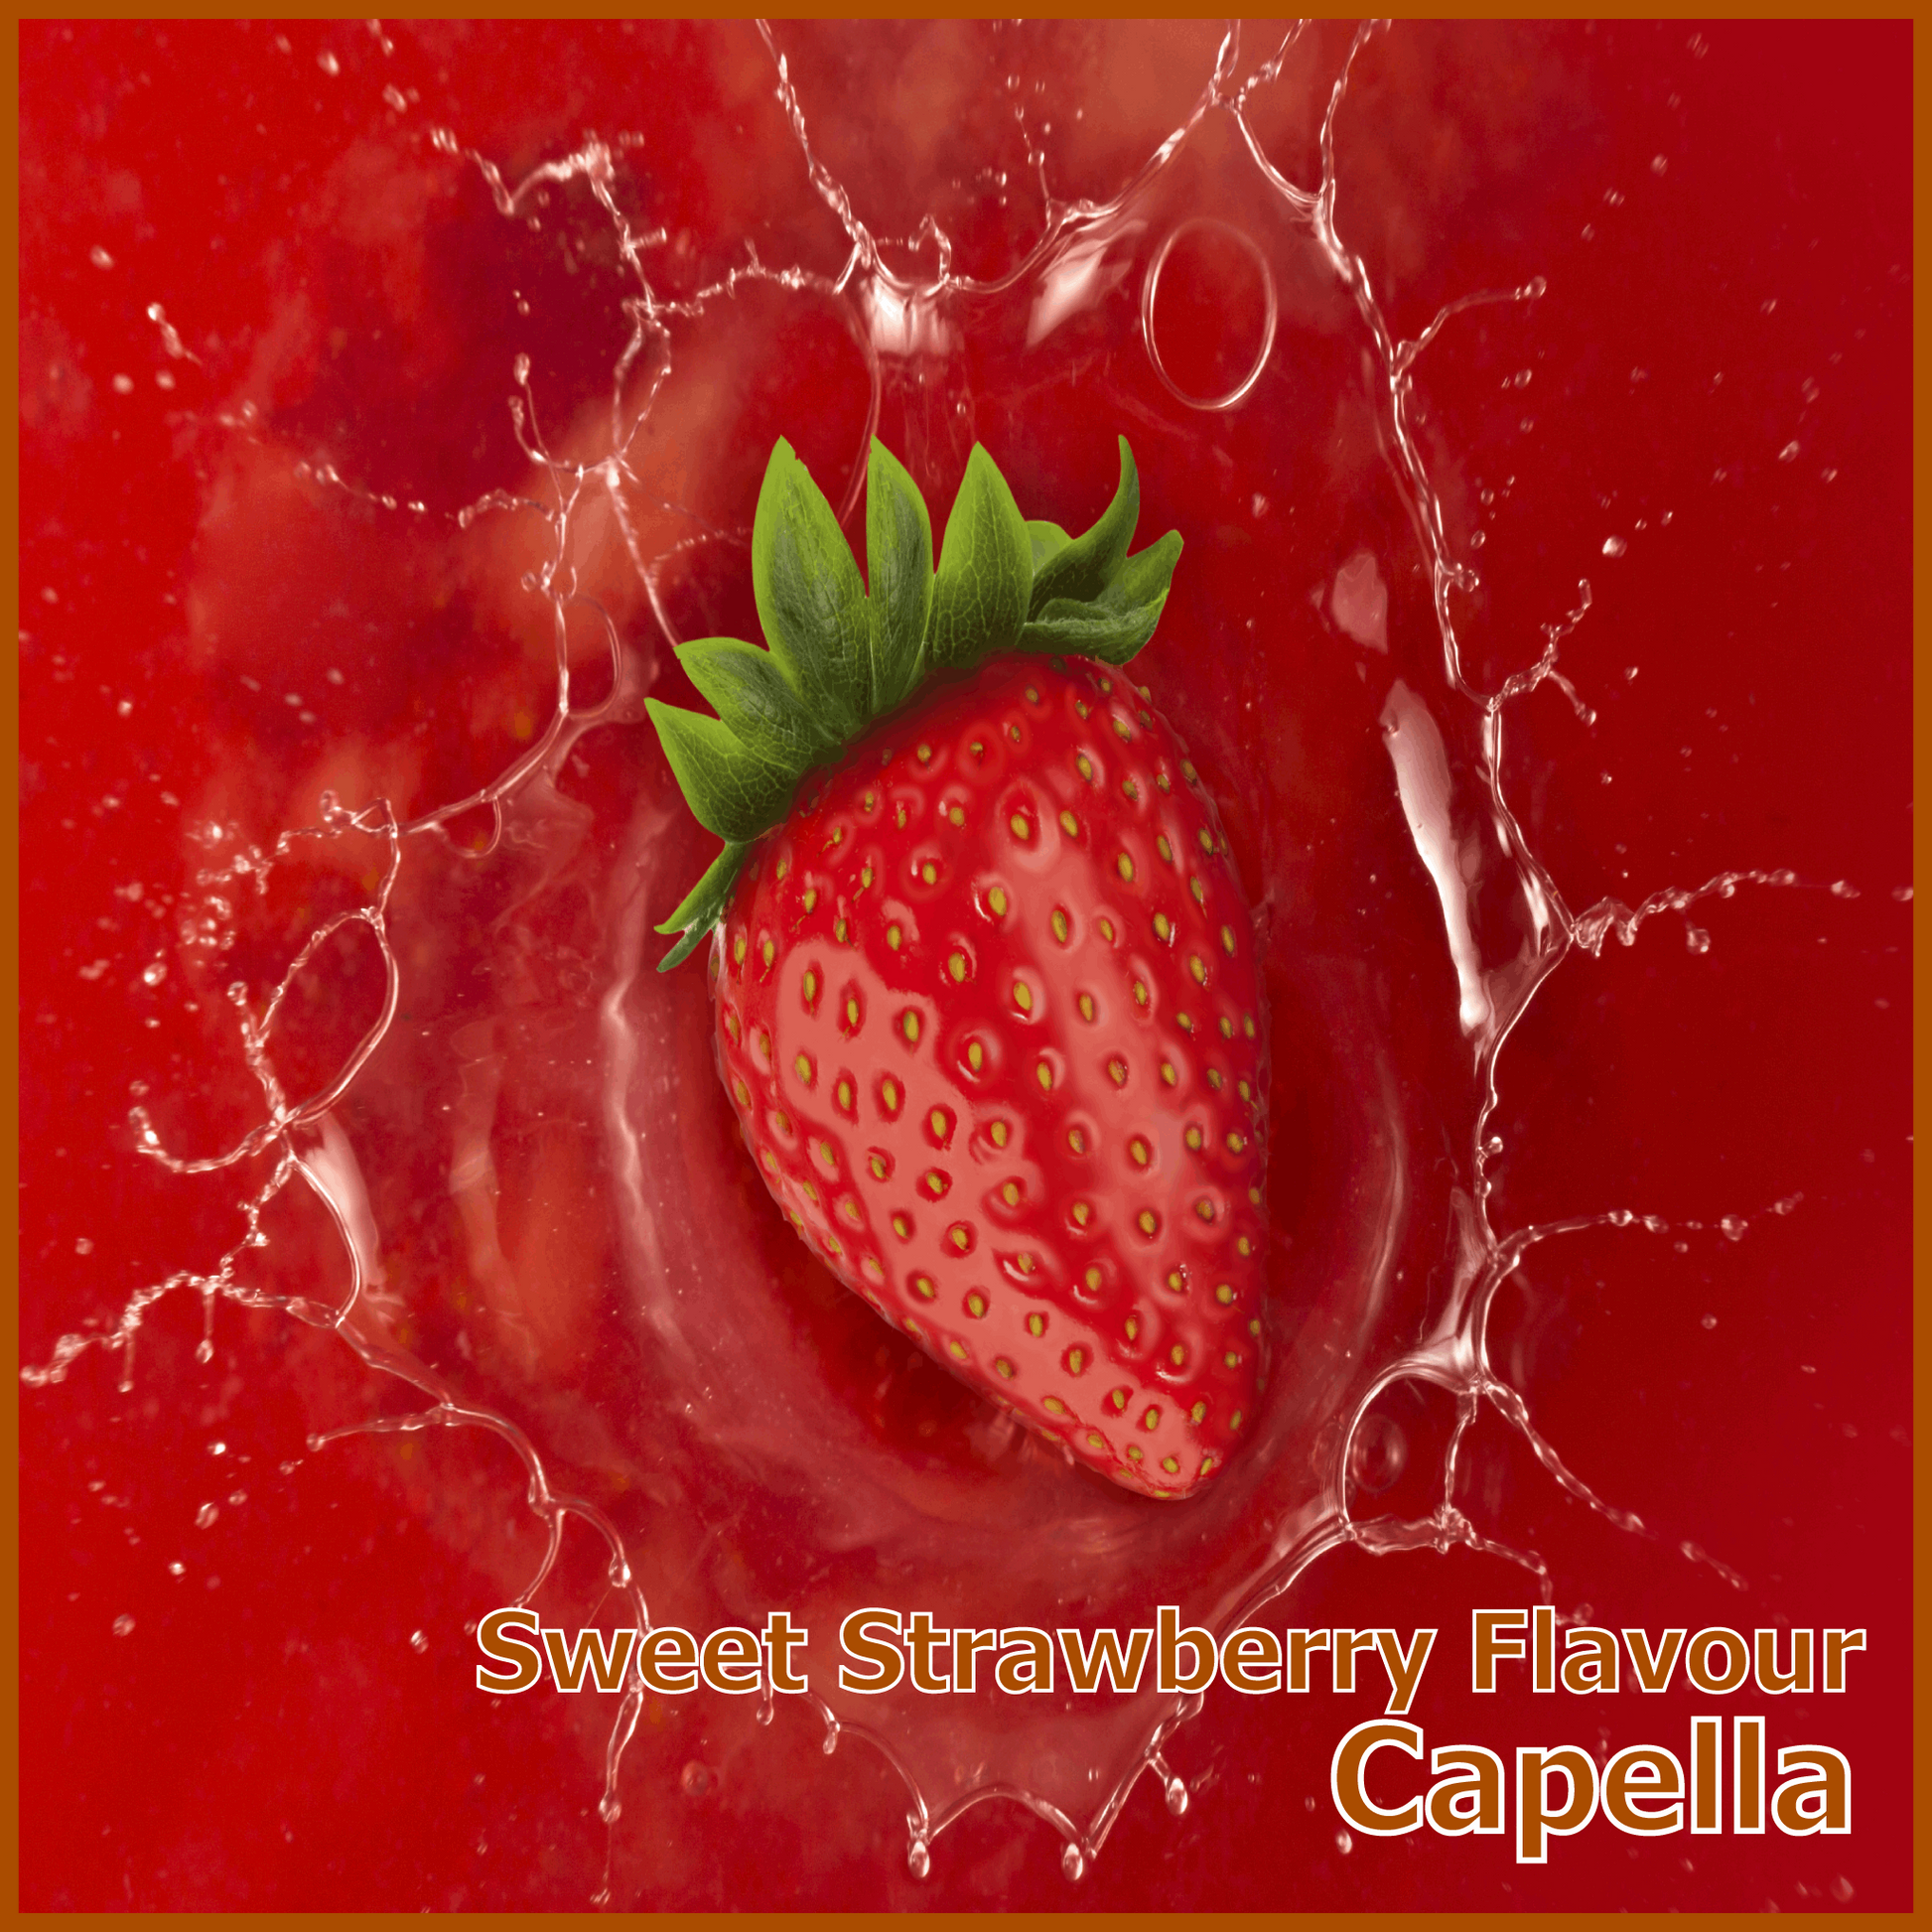 Sweet Strawberry Flavour - Capella - Flavour Fog - Canada's flavour depot.